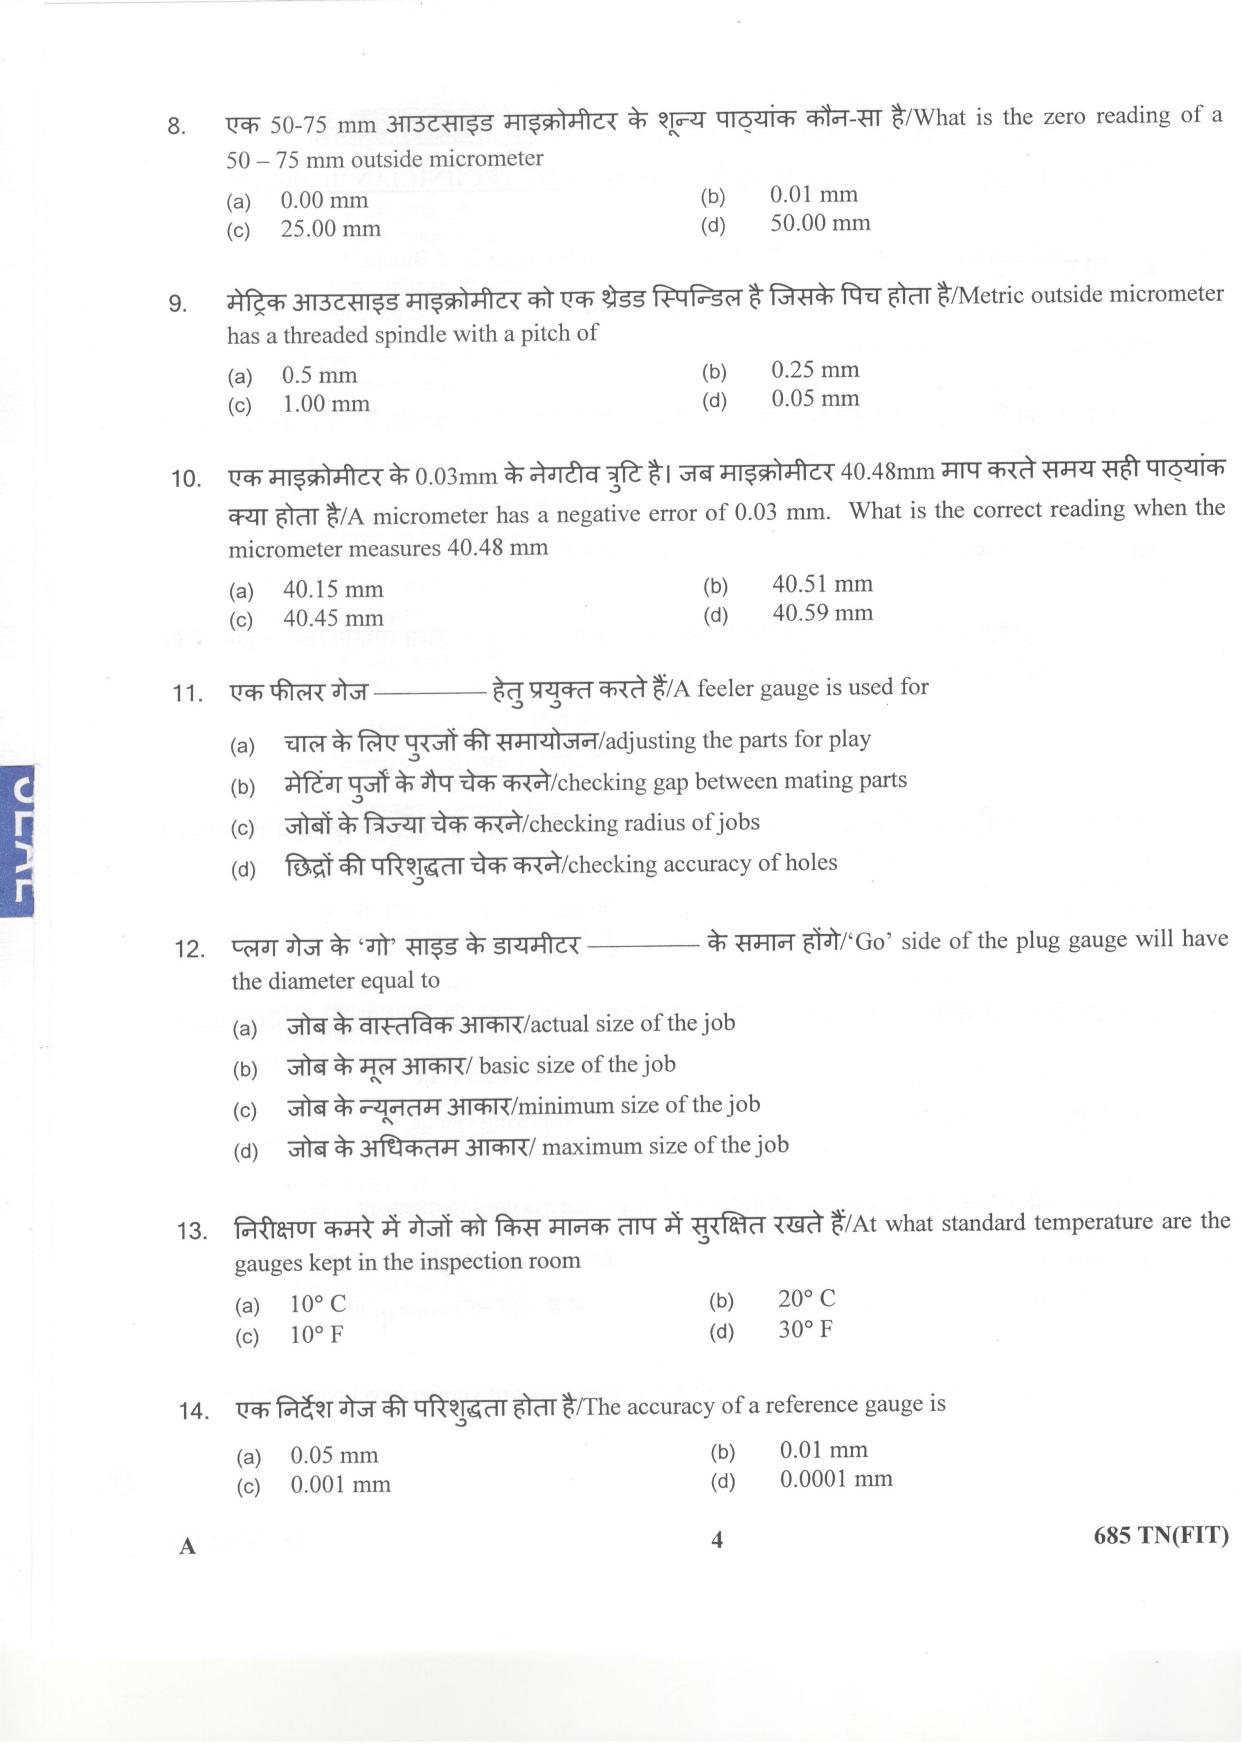 LPSC Technician ‘B’ (Fitter) 2018 Question Paper - Page 4